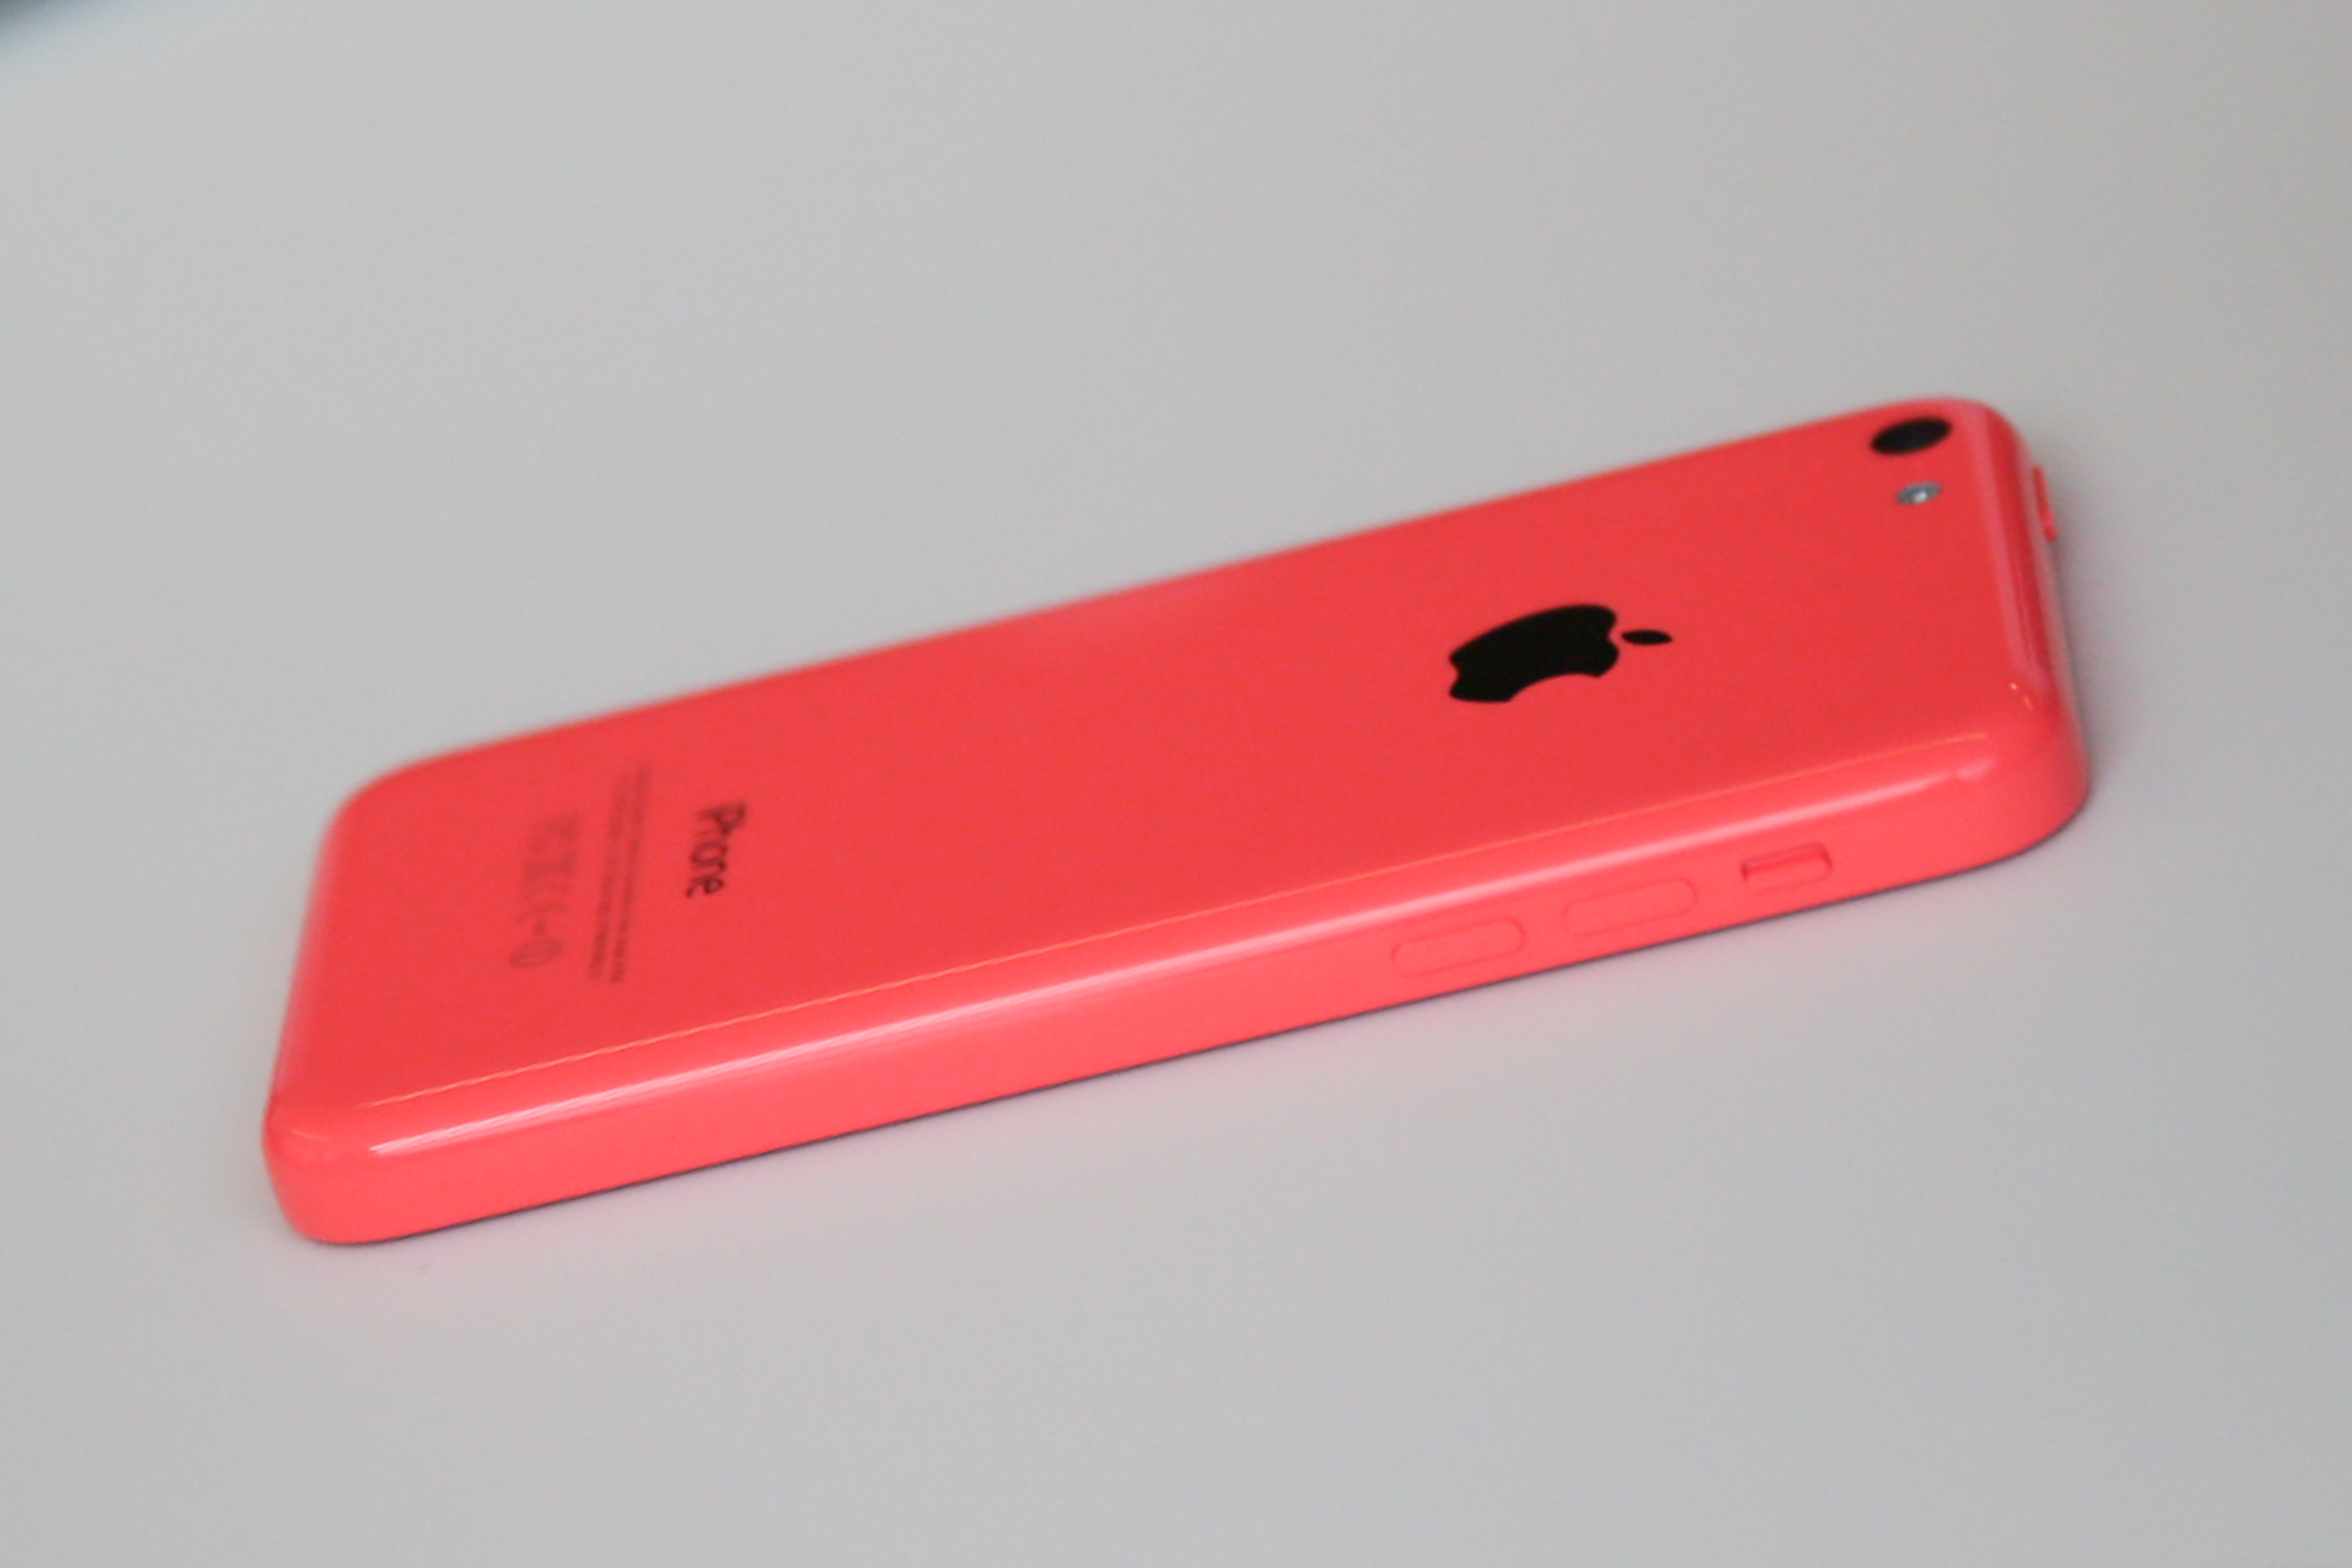 Red iPhone 5c Wallpaper And Image Pictures Photos